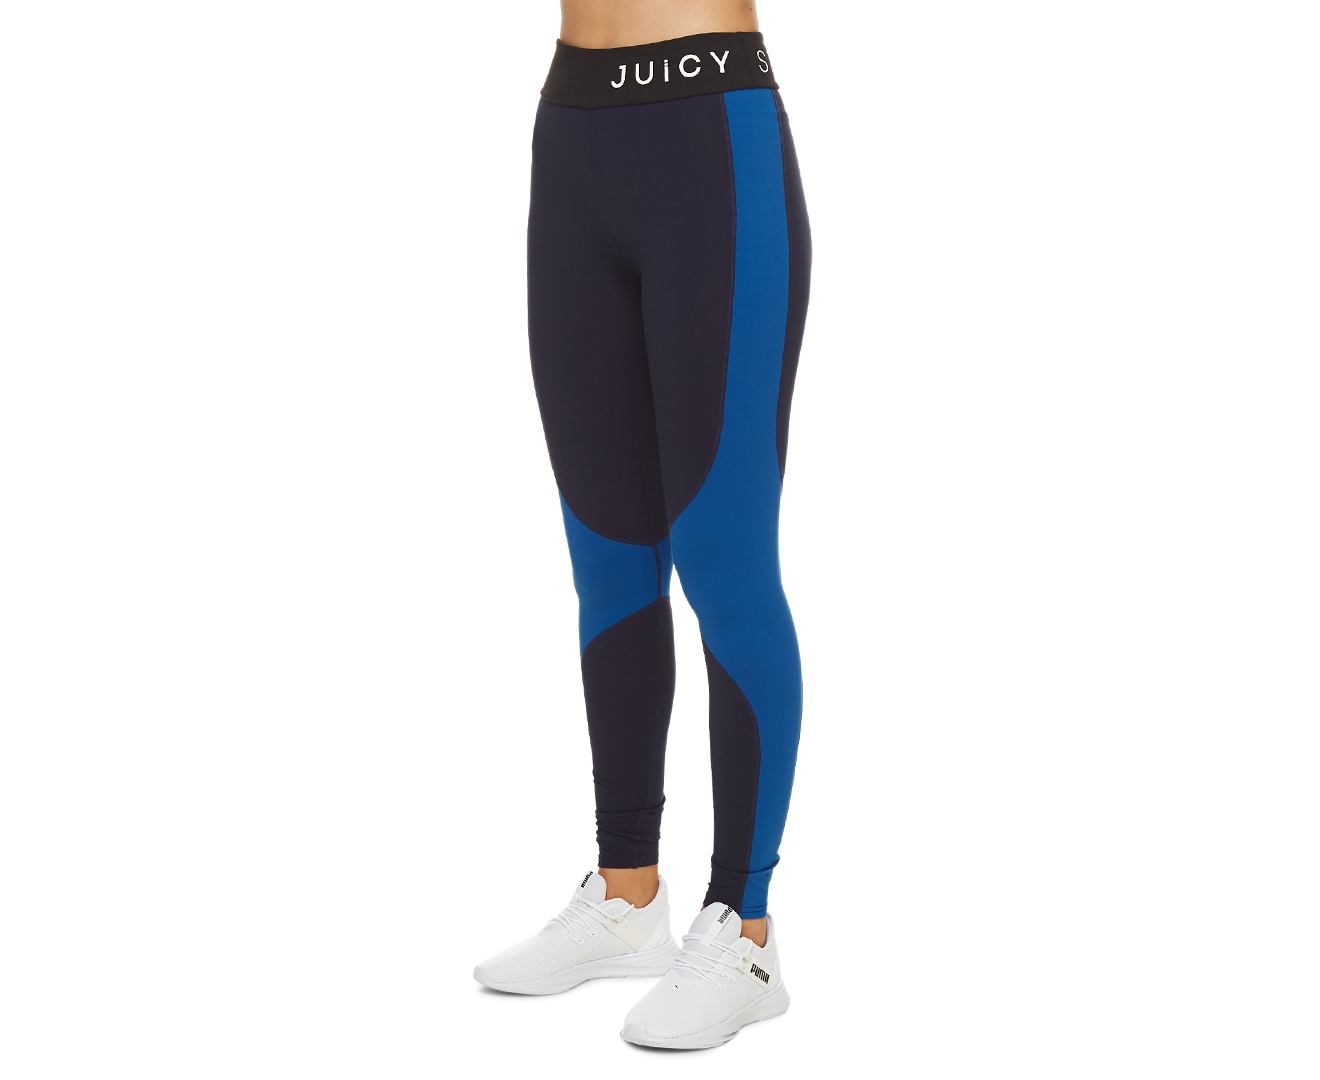 Juicy Couture Sport Women's High Waist Tights / Leggings